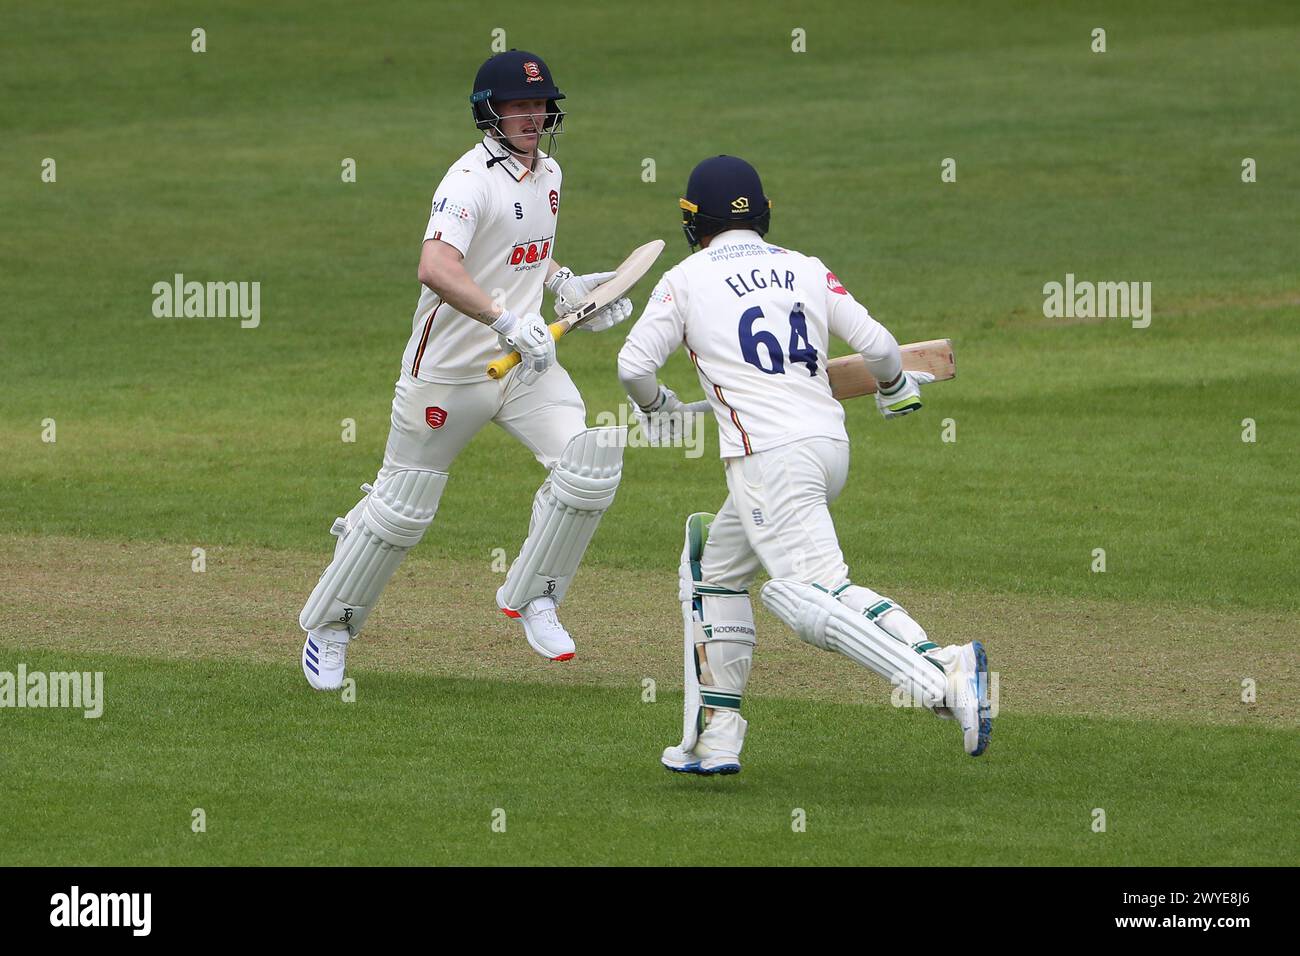 Jordan Cox (L) and Dean Elgar in batting action for Essex during Nottinghamshire CCC vs Essex CCC, Vitality County Championship Division 1 Cricket at Stock Photo